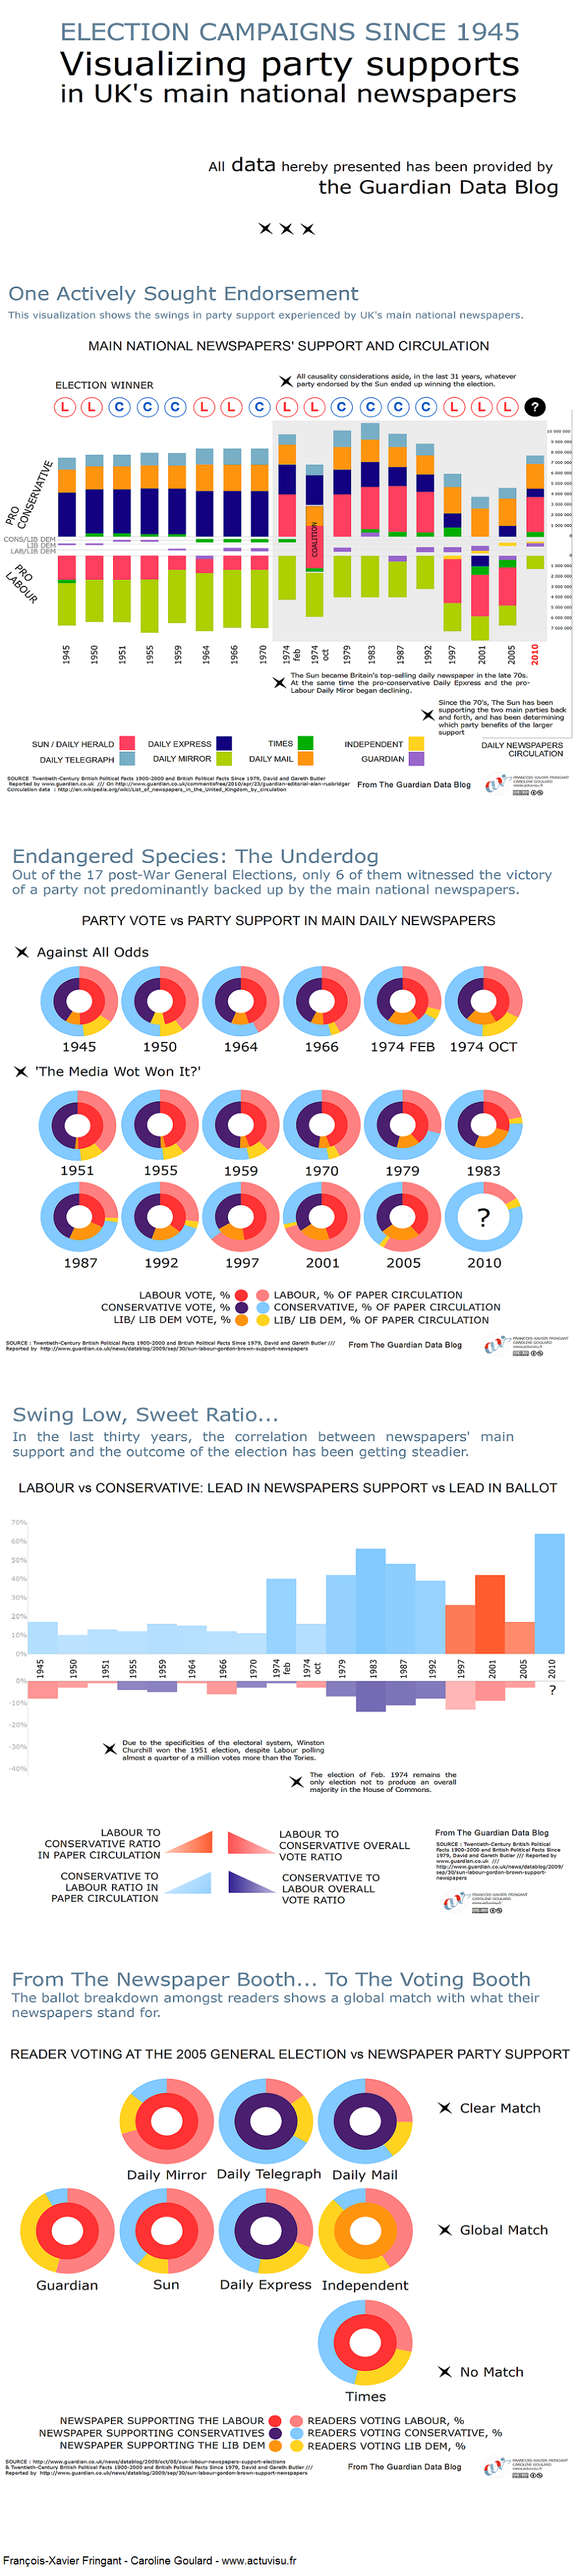 visualizing-party-support-in-uks-main-national-newspapers-actuvisu-redimensionnee2.png